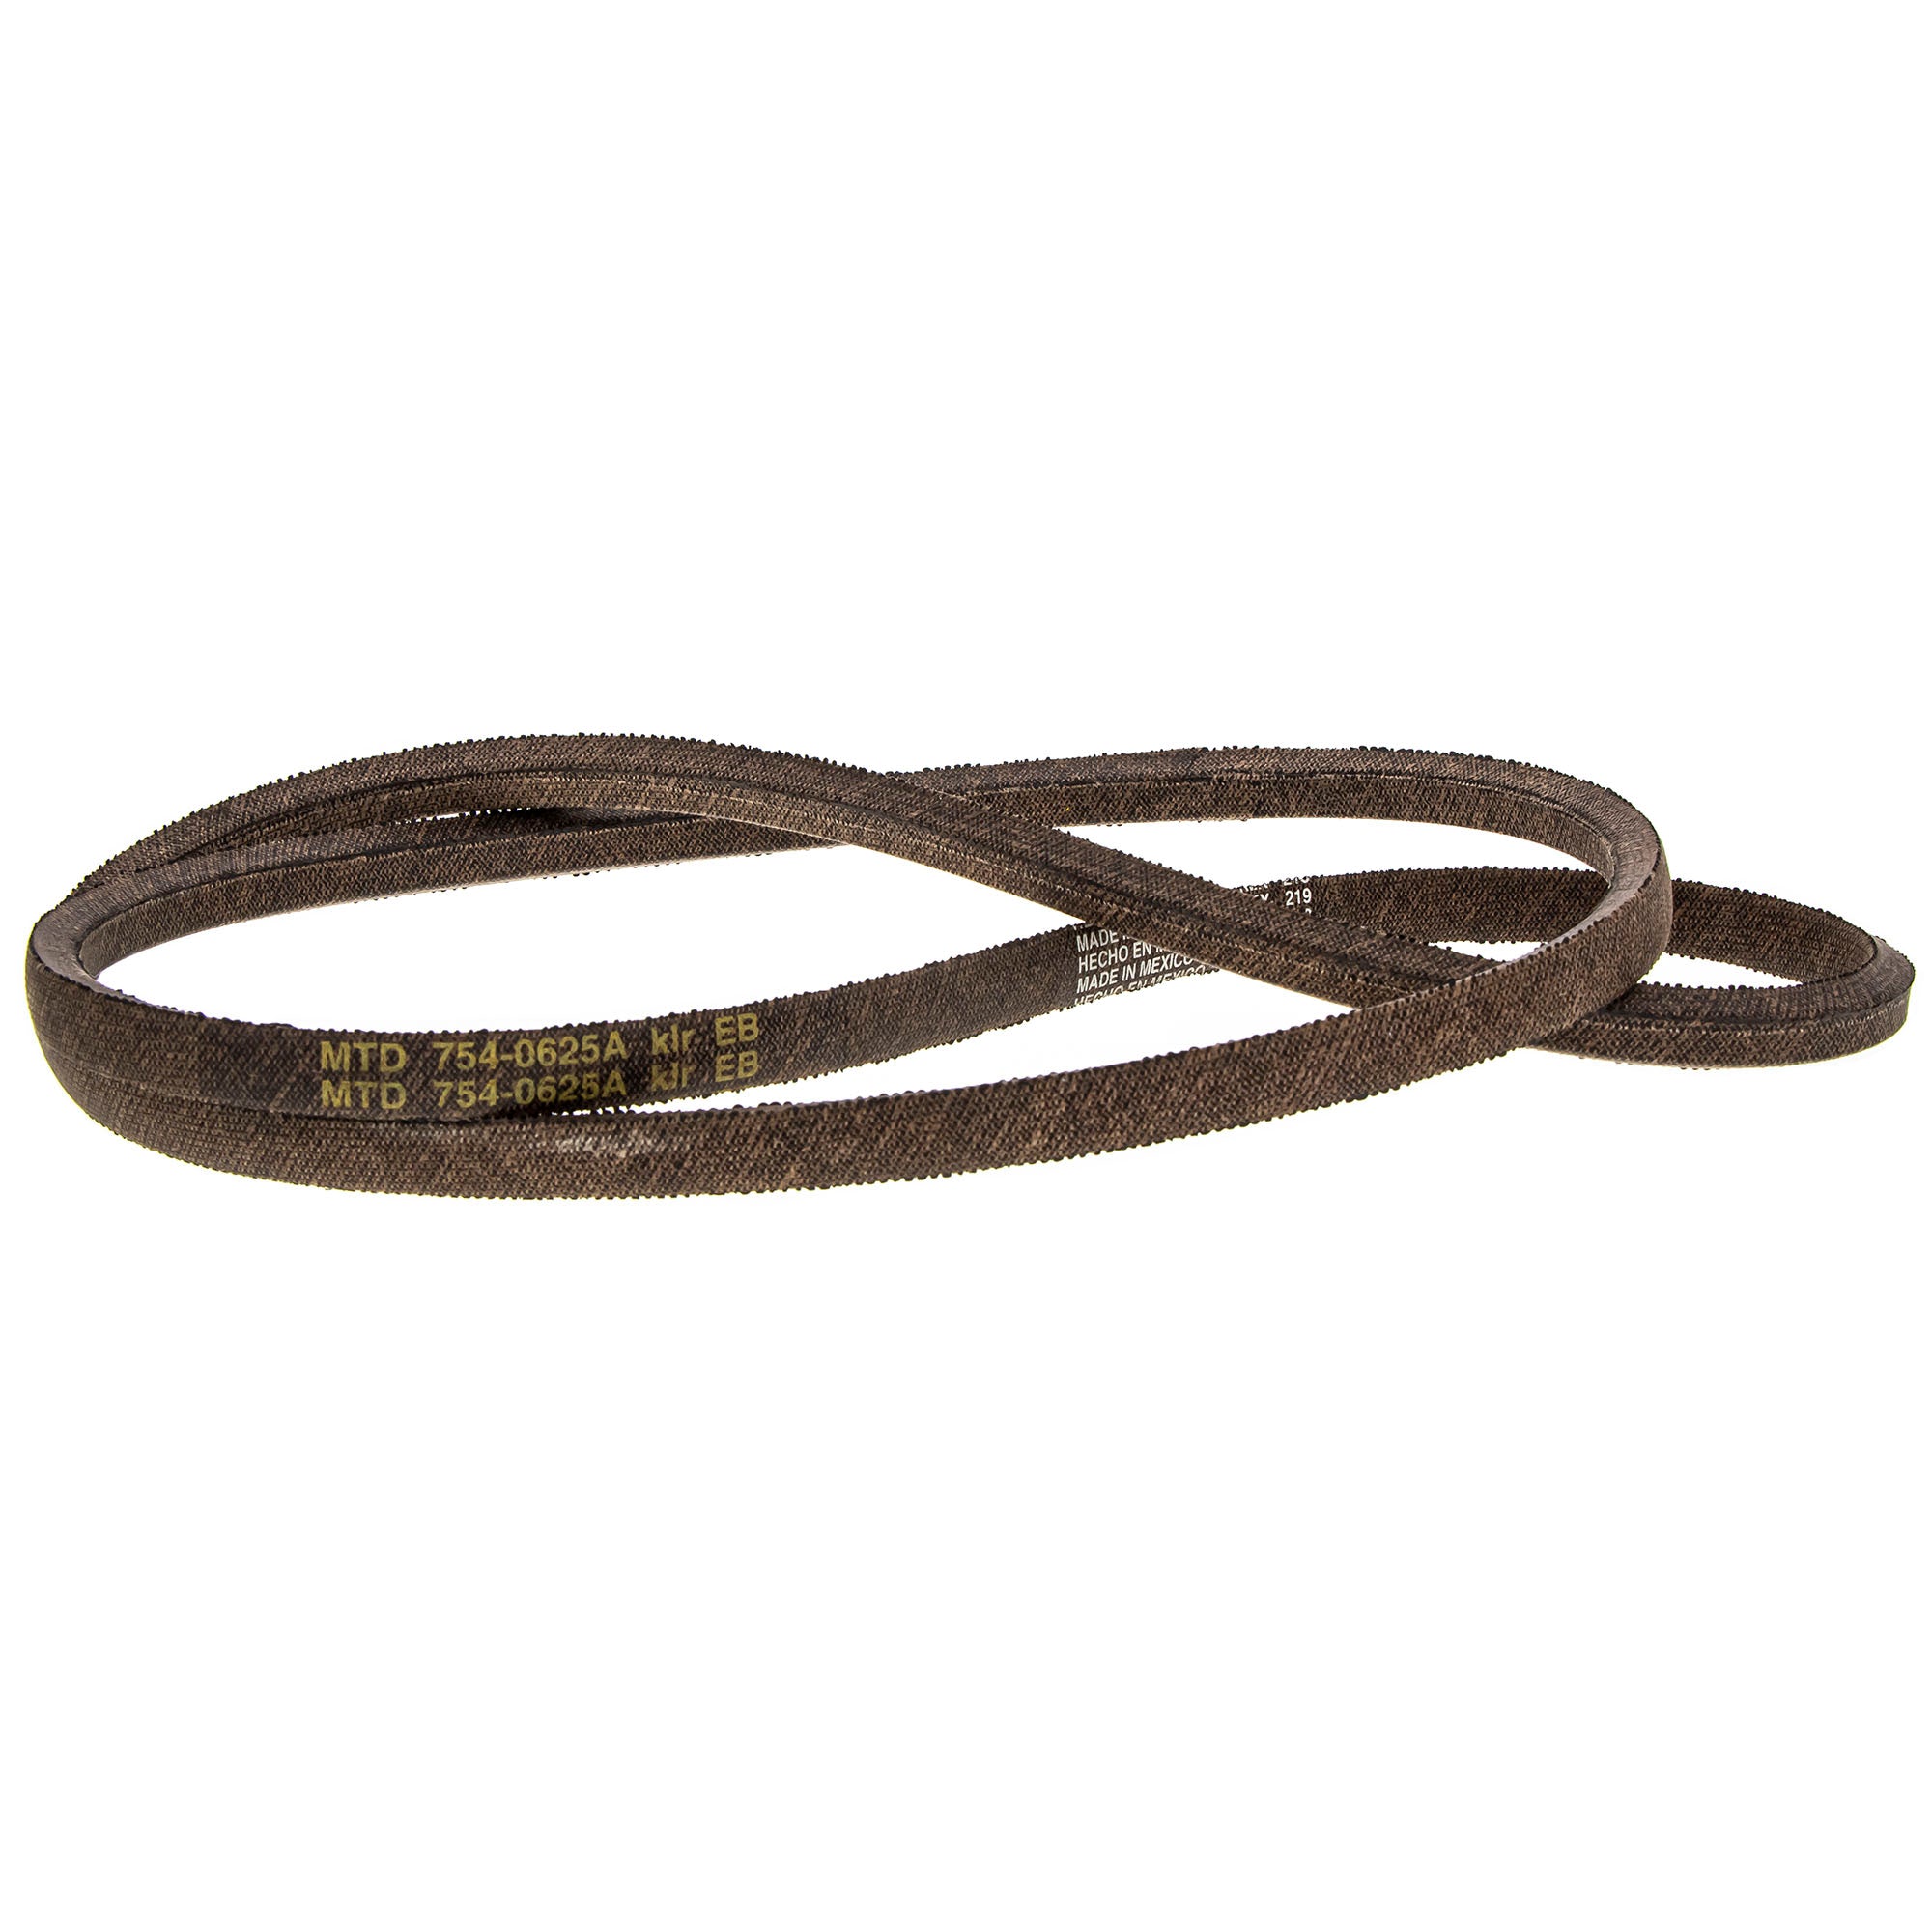 Replacement Belt for MTD 754-0489, 754-0625, 754-0625A, 954-0489